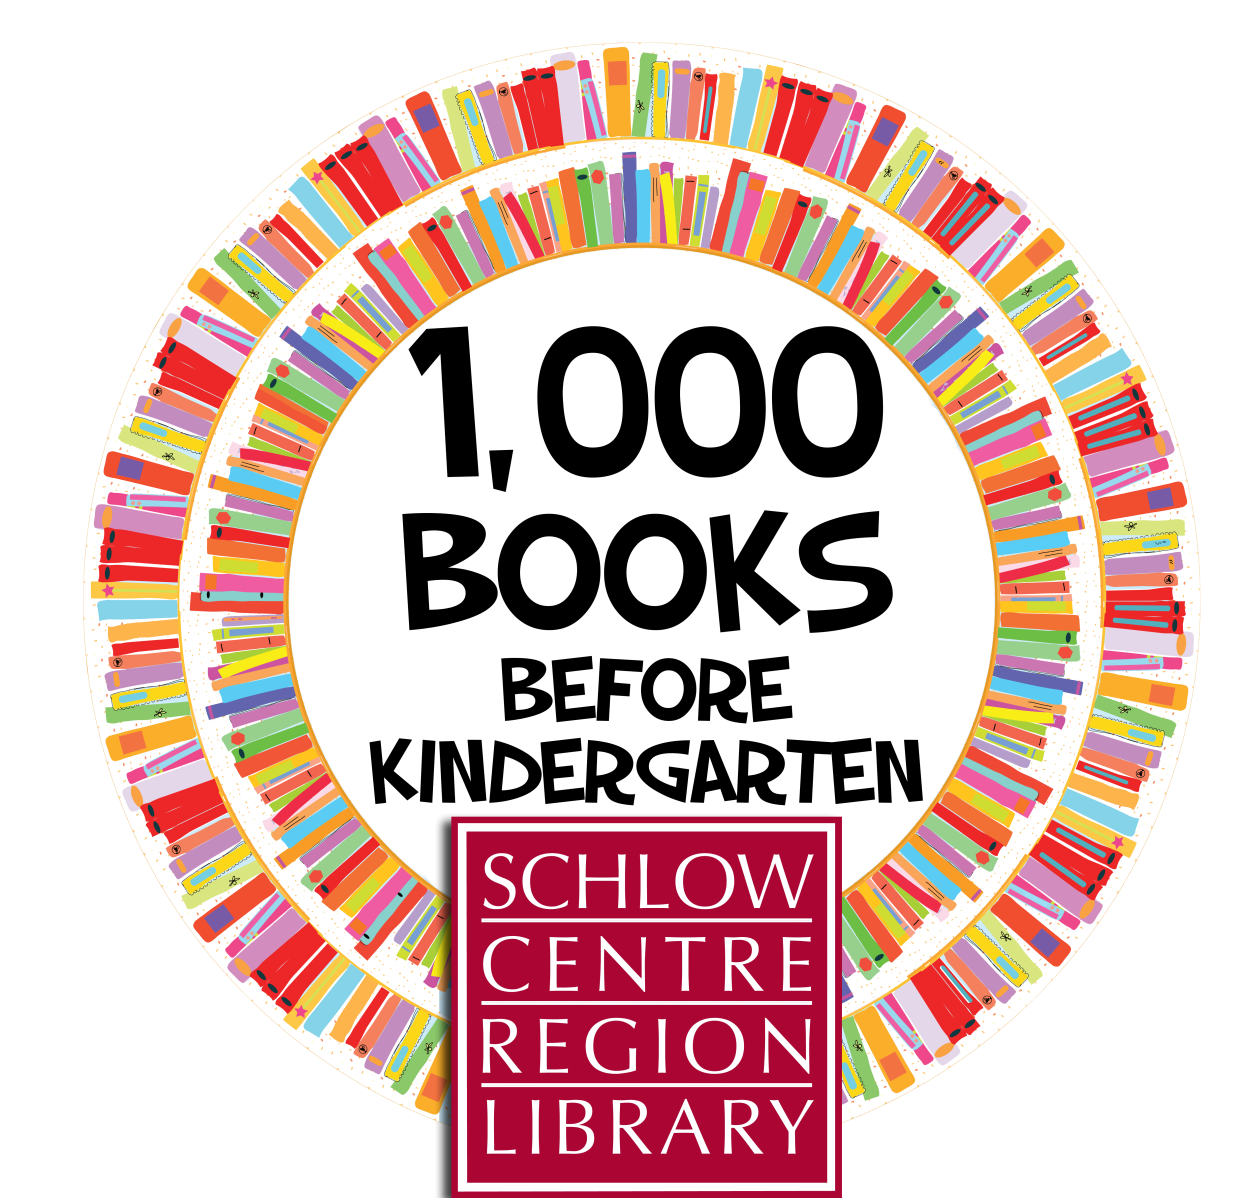 A colorful ring of book spines encircles text that reads "1,000 Books Before Kindergarten" above the Schlow Library logo.